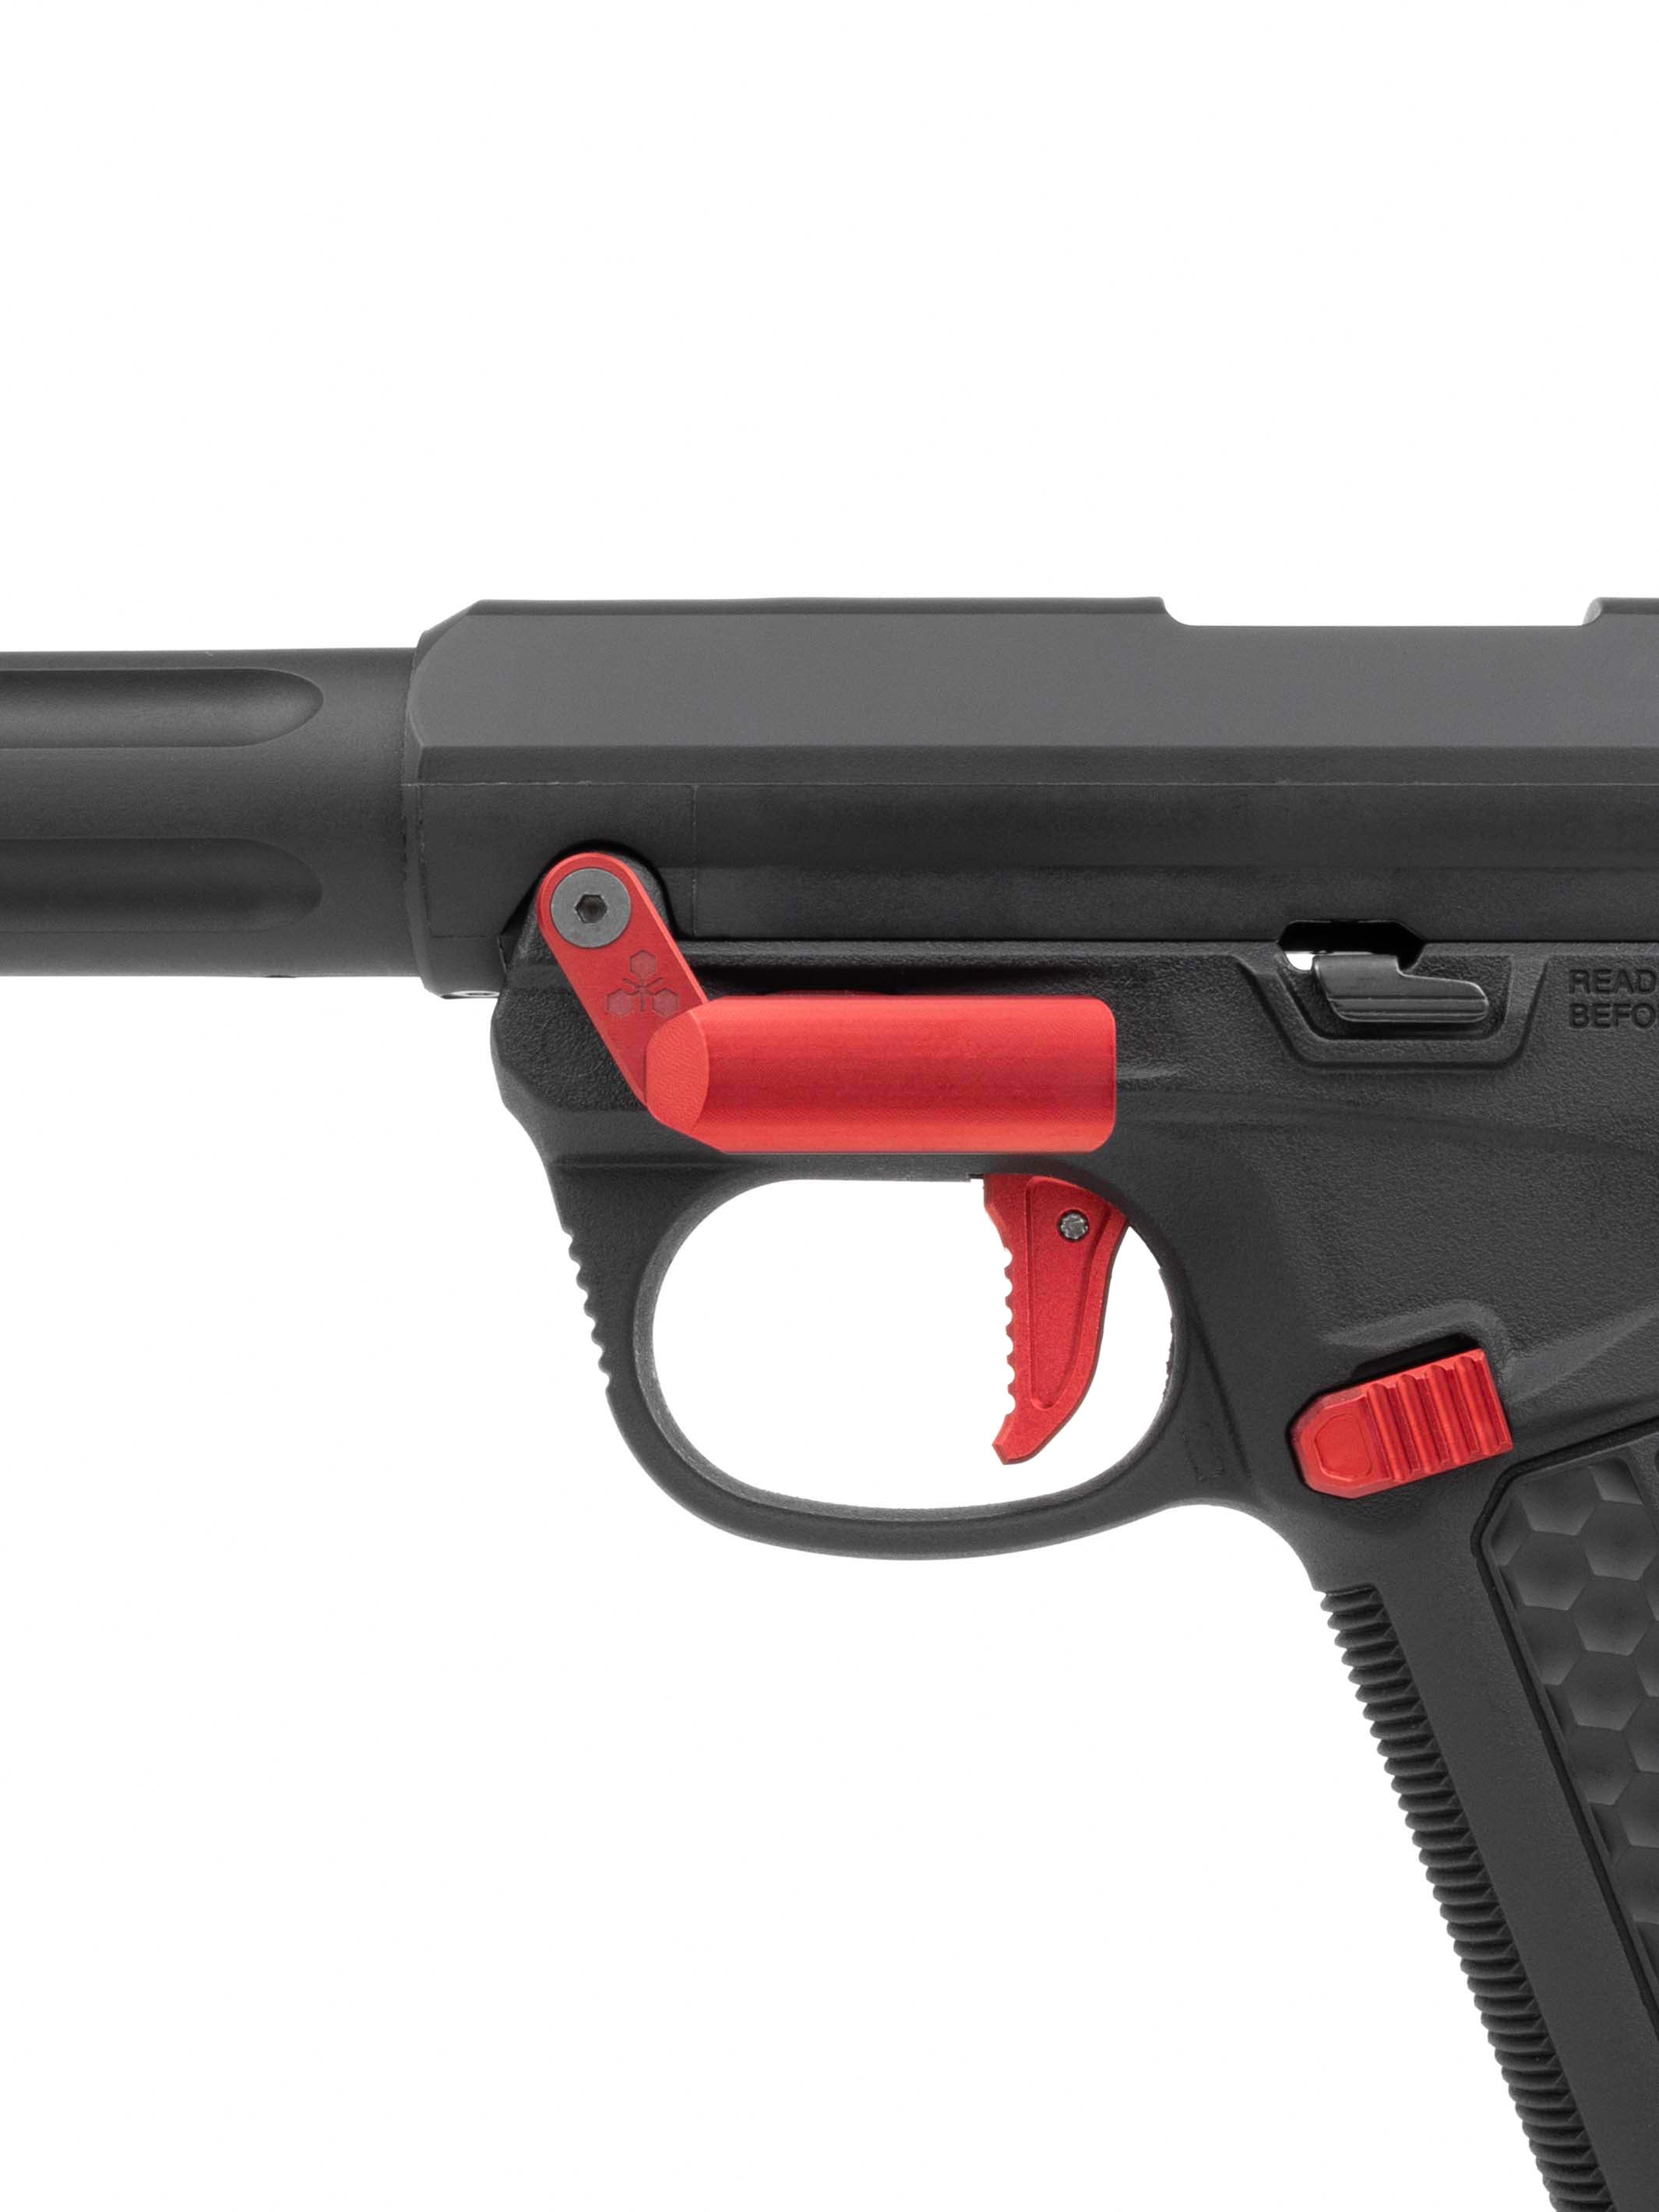 aap-01 with red novritsch univeral holster mount installed#color_red